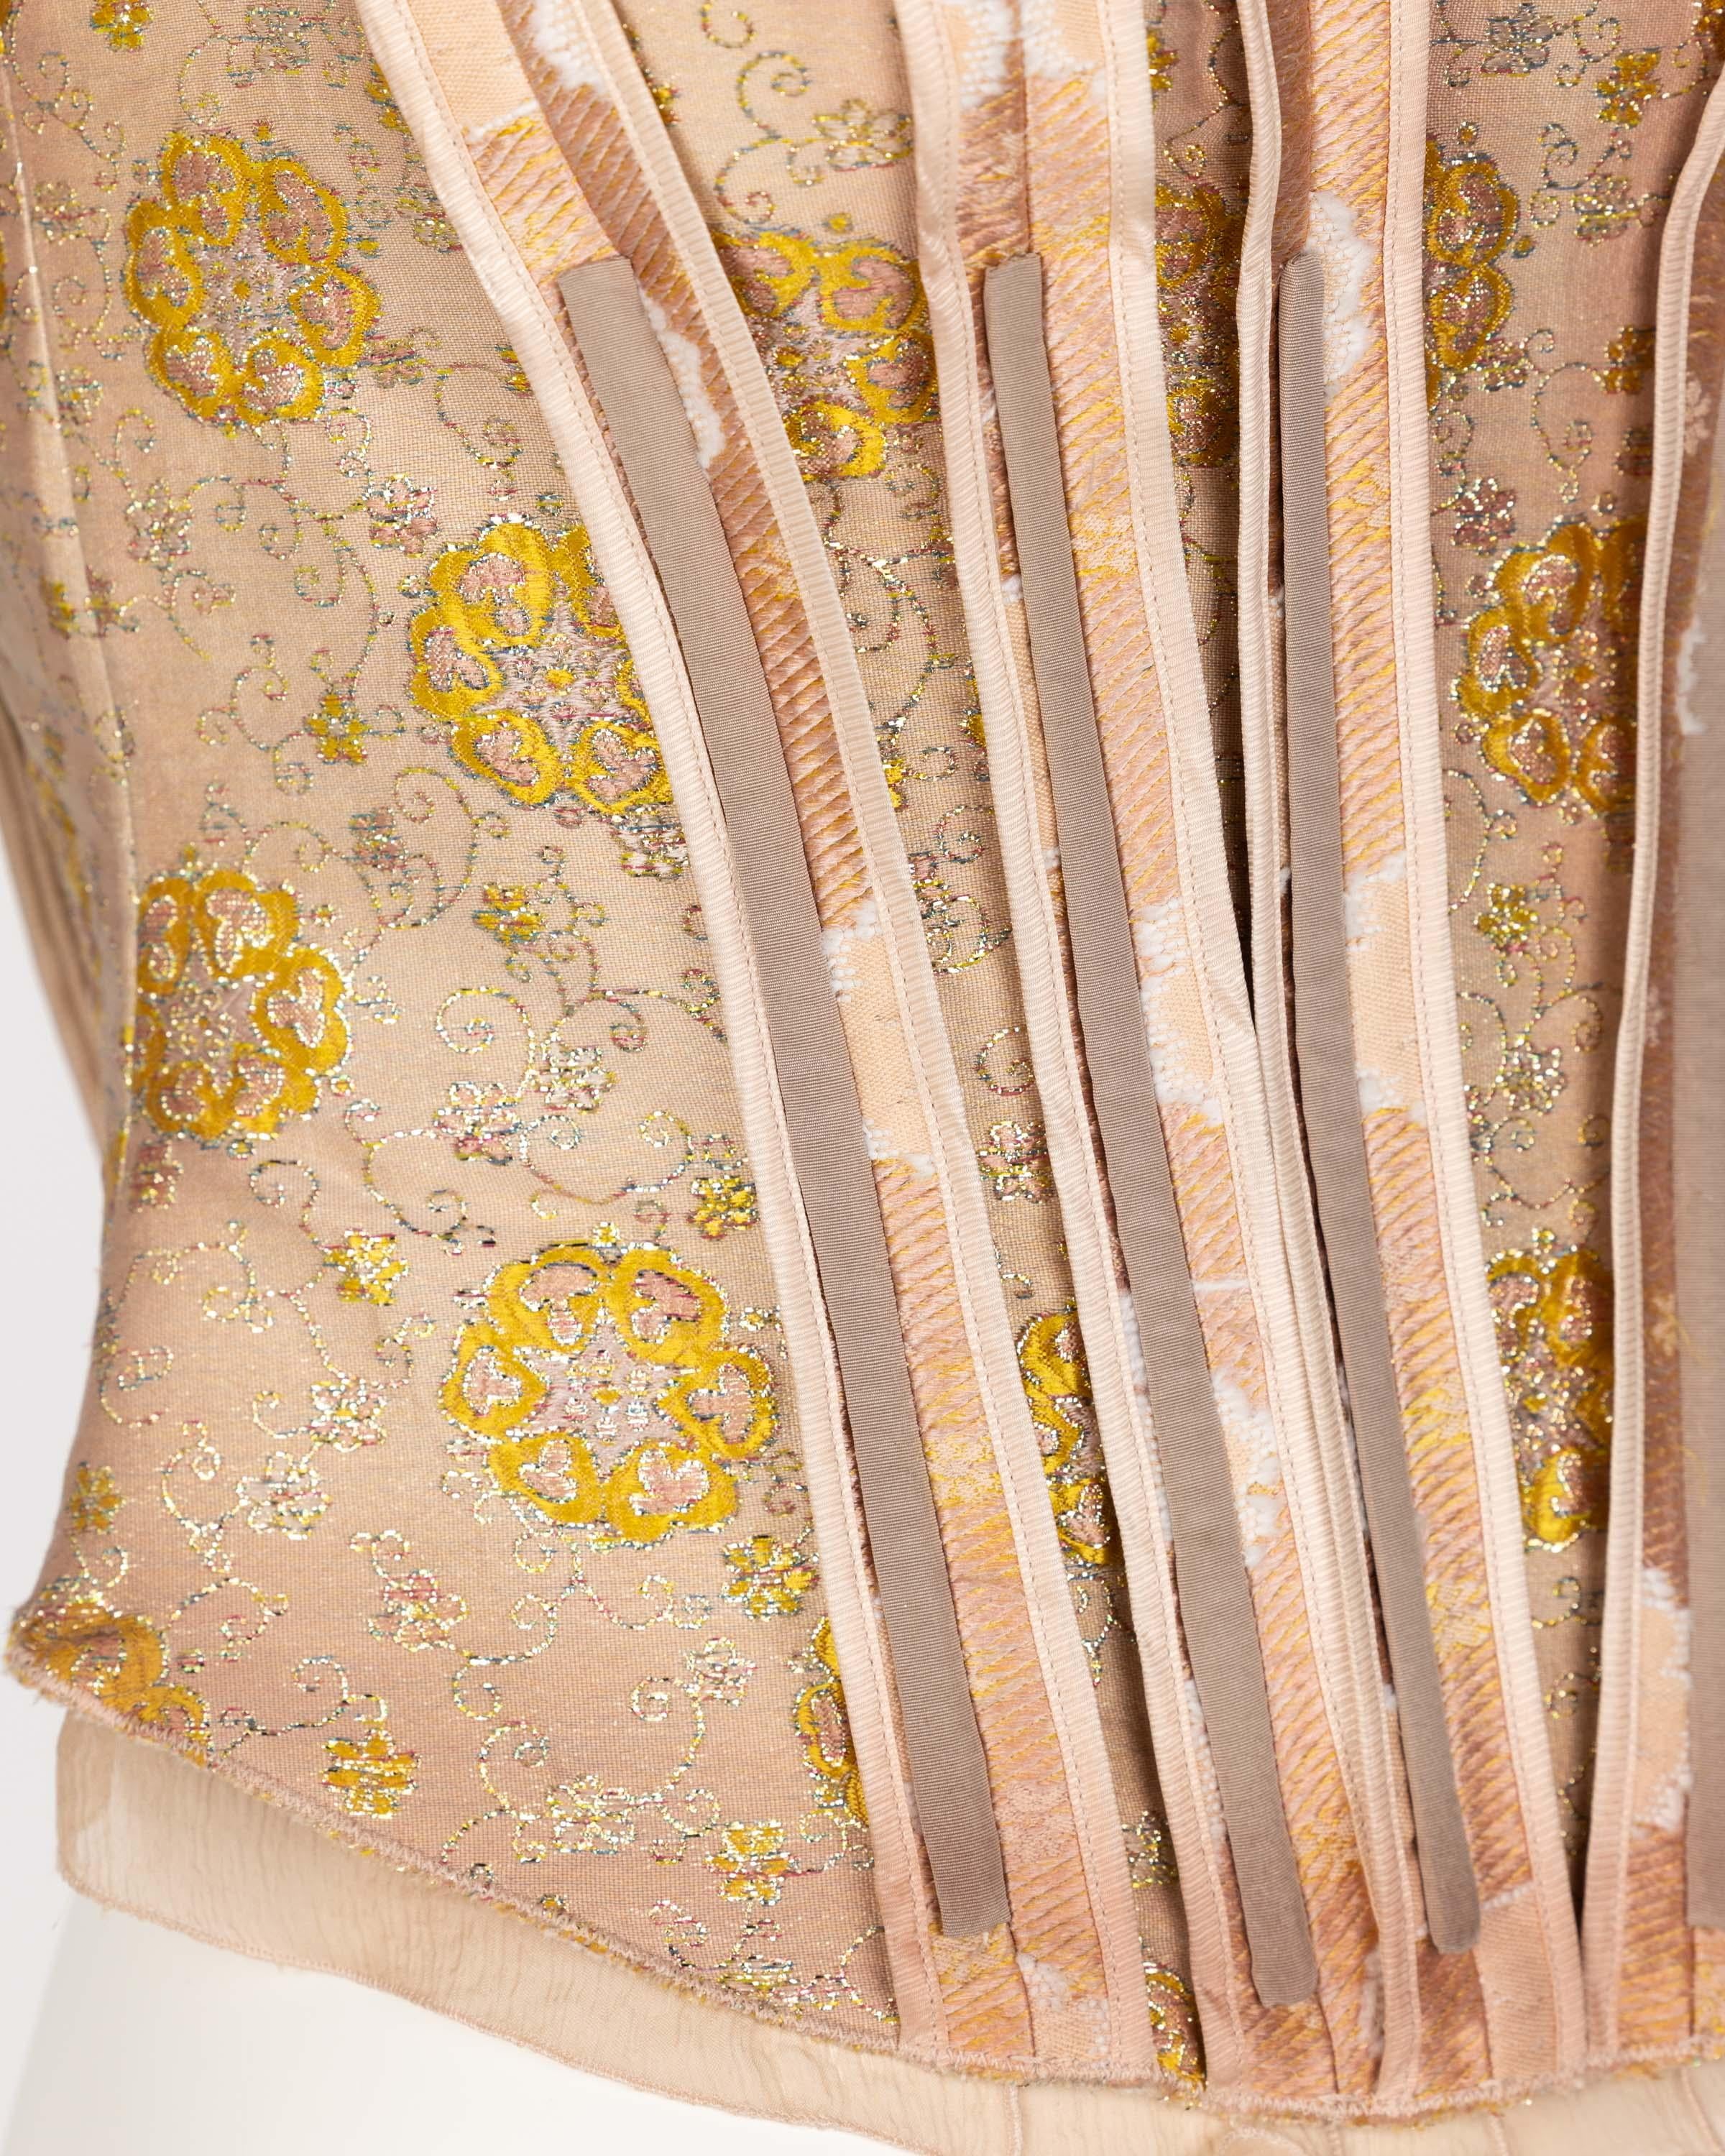 Prada Pink & Gold Floral Brocade Corset Top In Excellent Condition For Sale In Boca Raton, FL